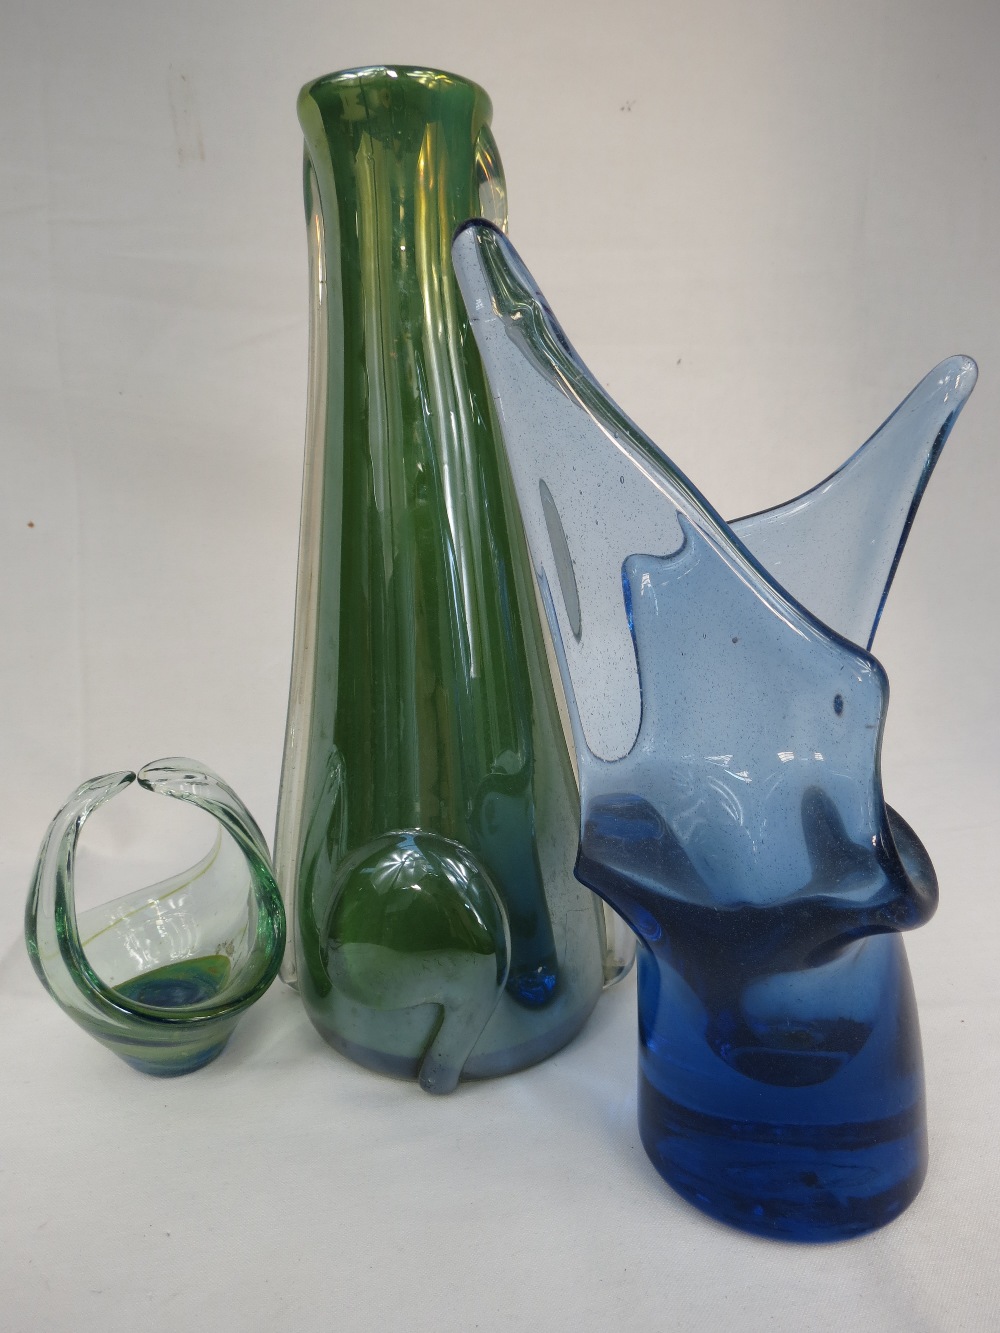 A studio glassware vase iin semi-opaque green, 12", a blue vase of abstract shape, 10" and a green